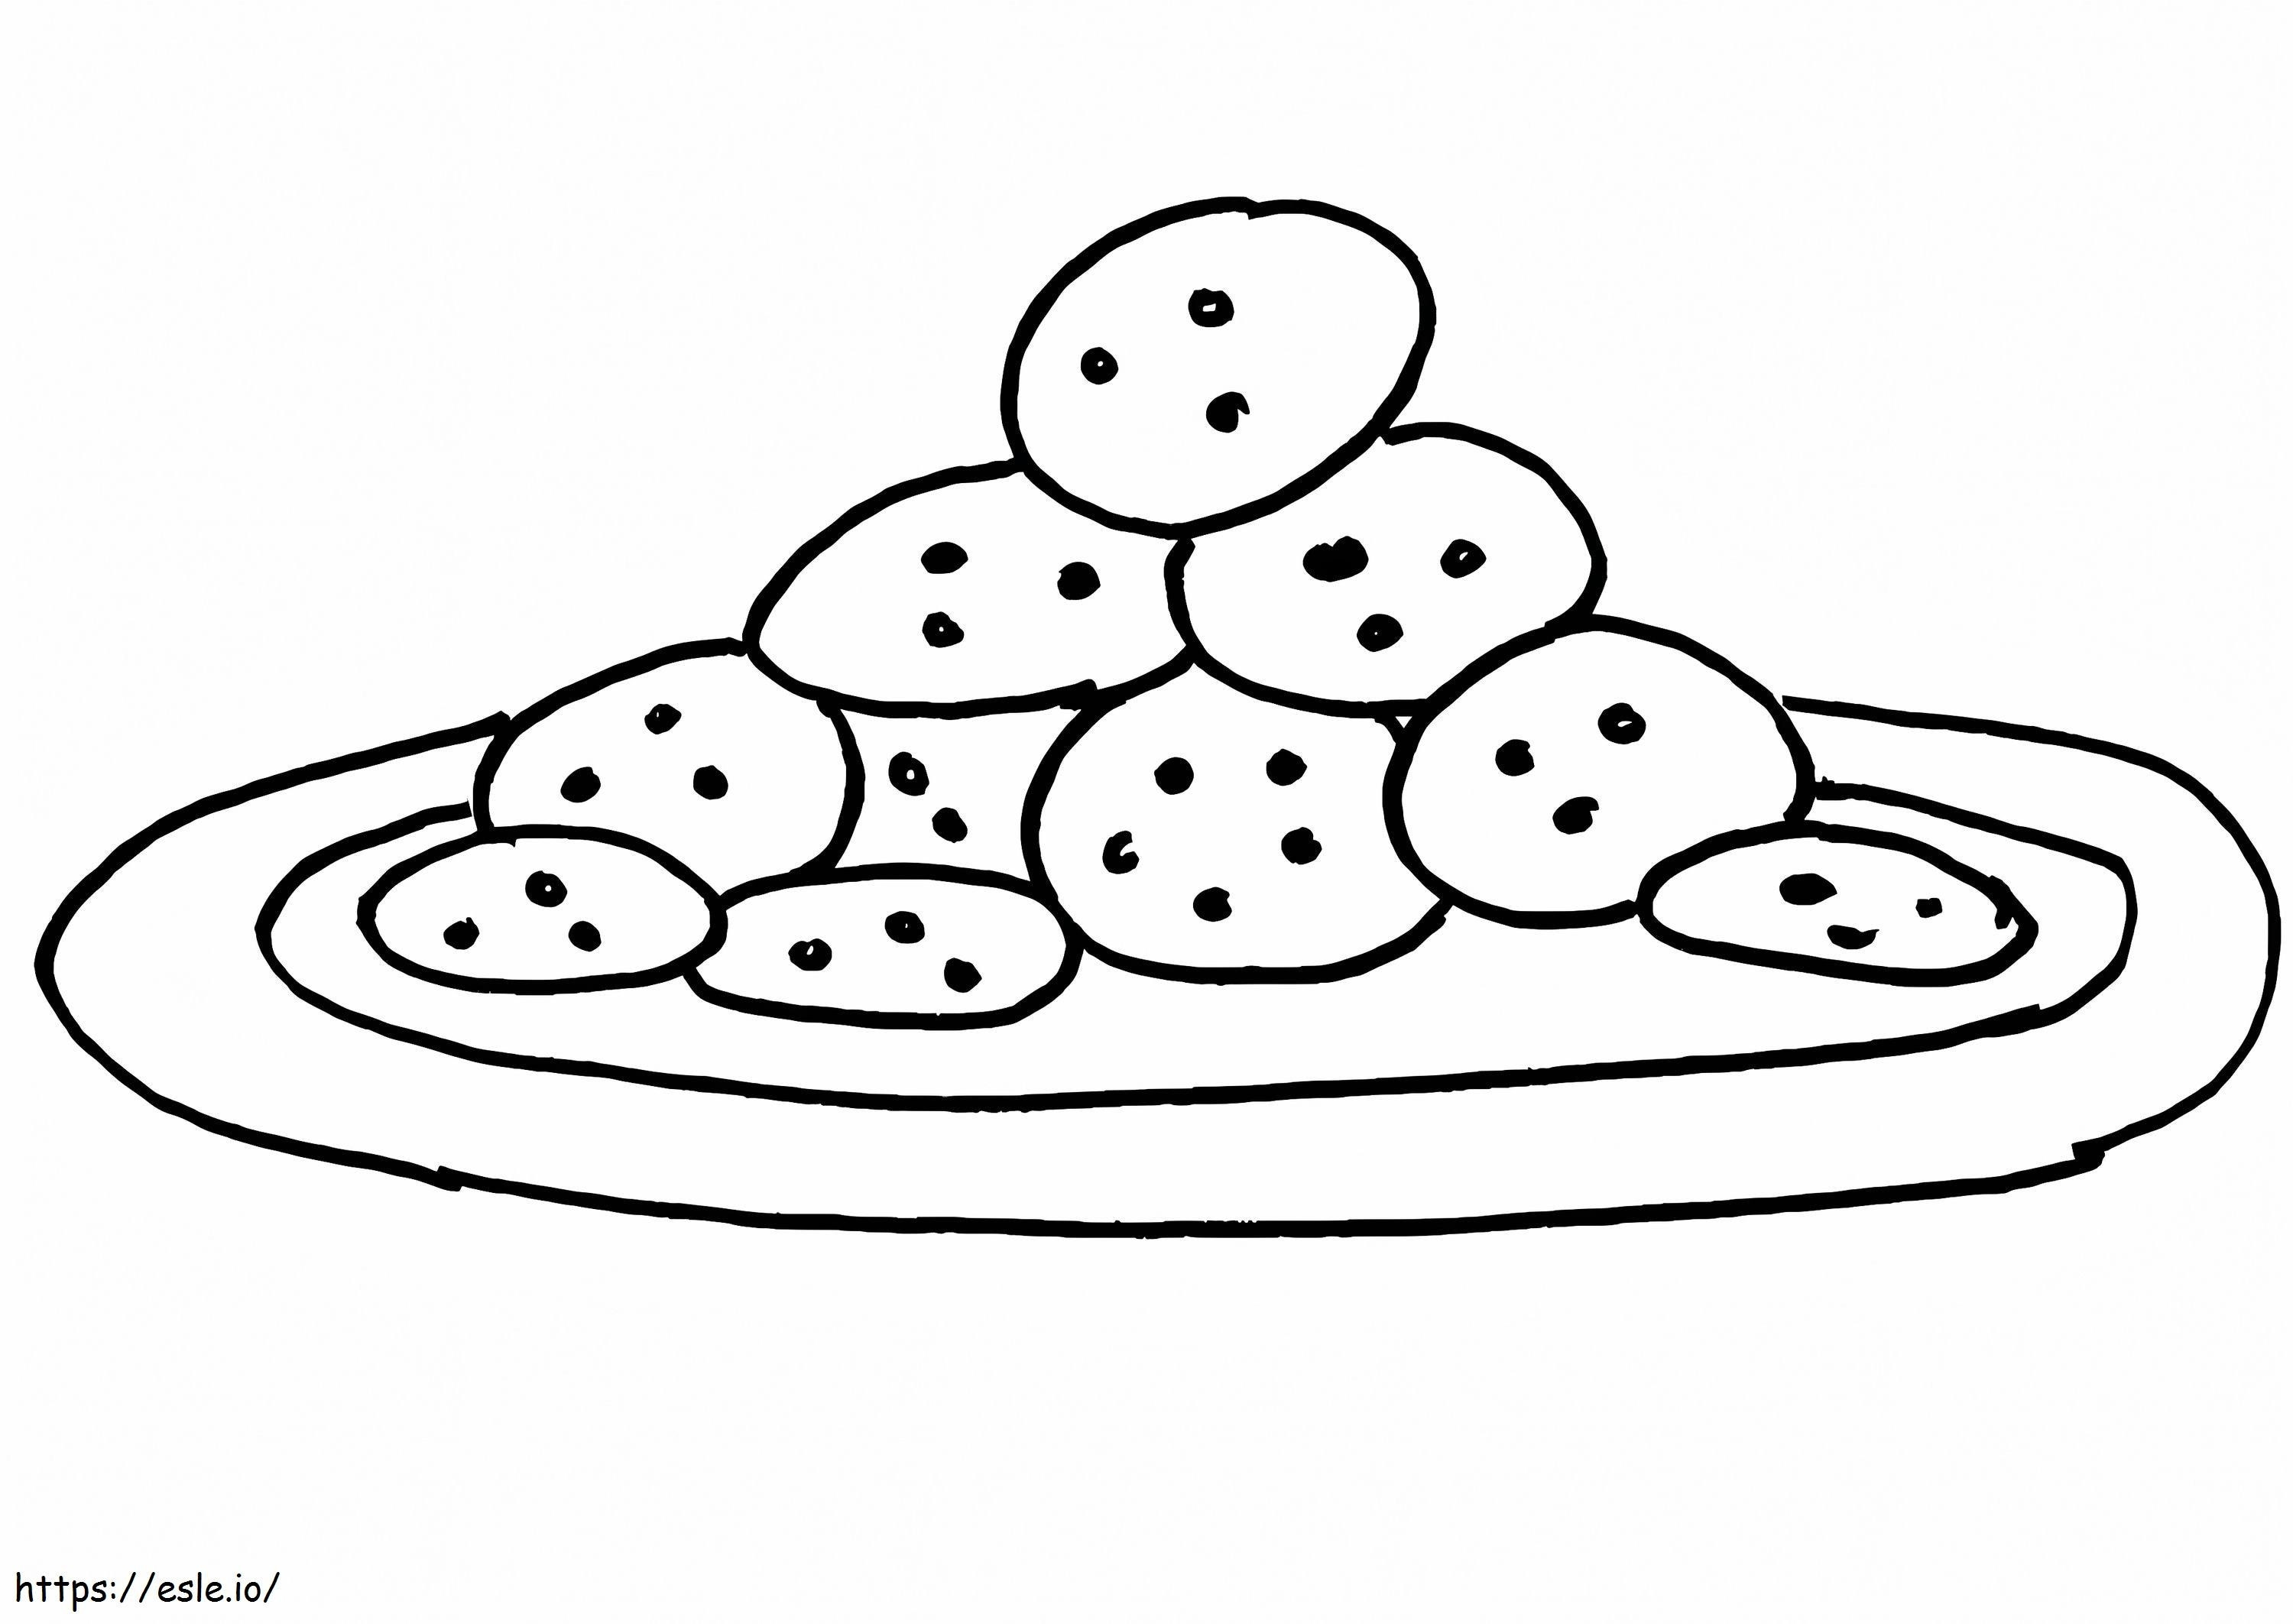 Cookies On Plate 1 coloring page